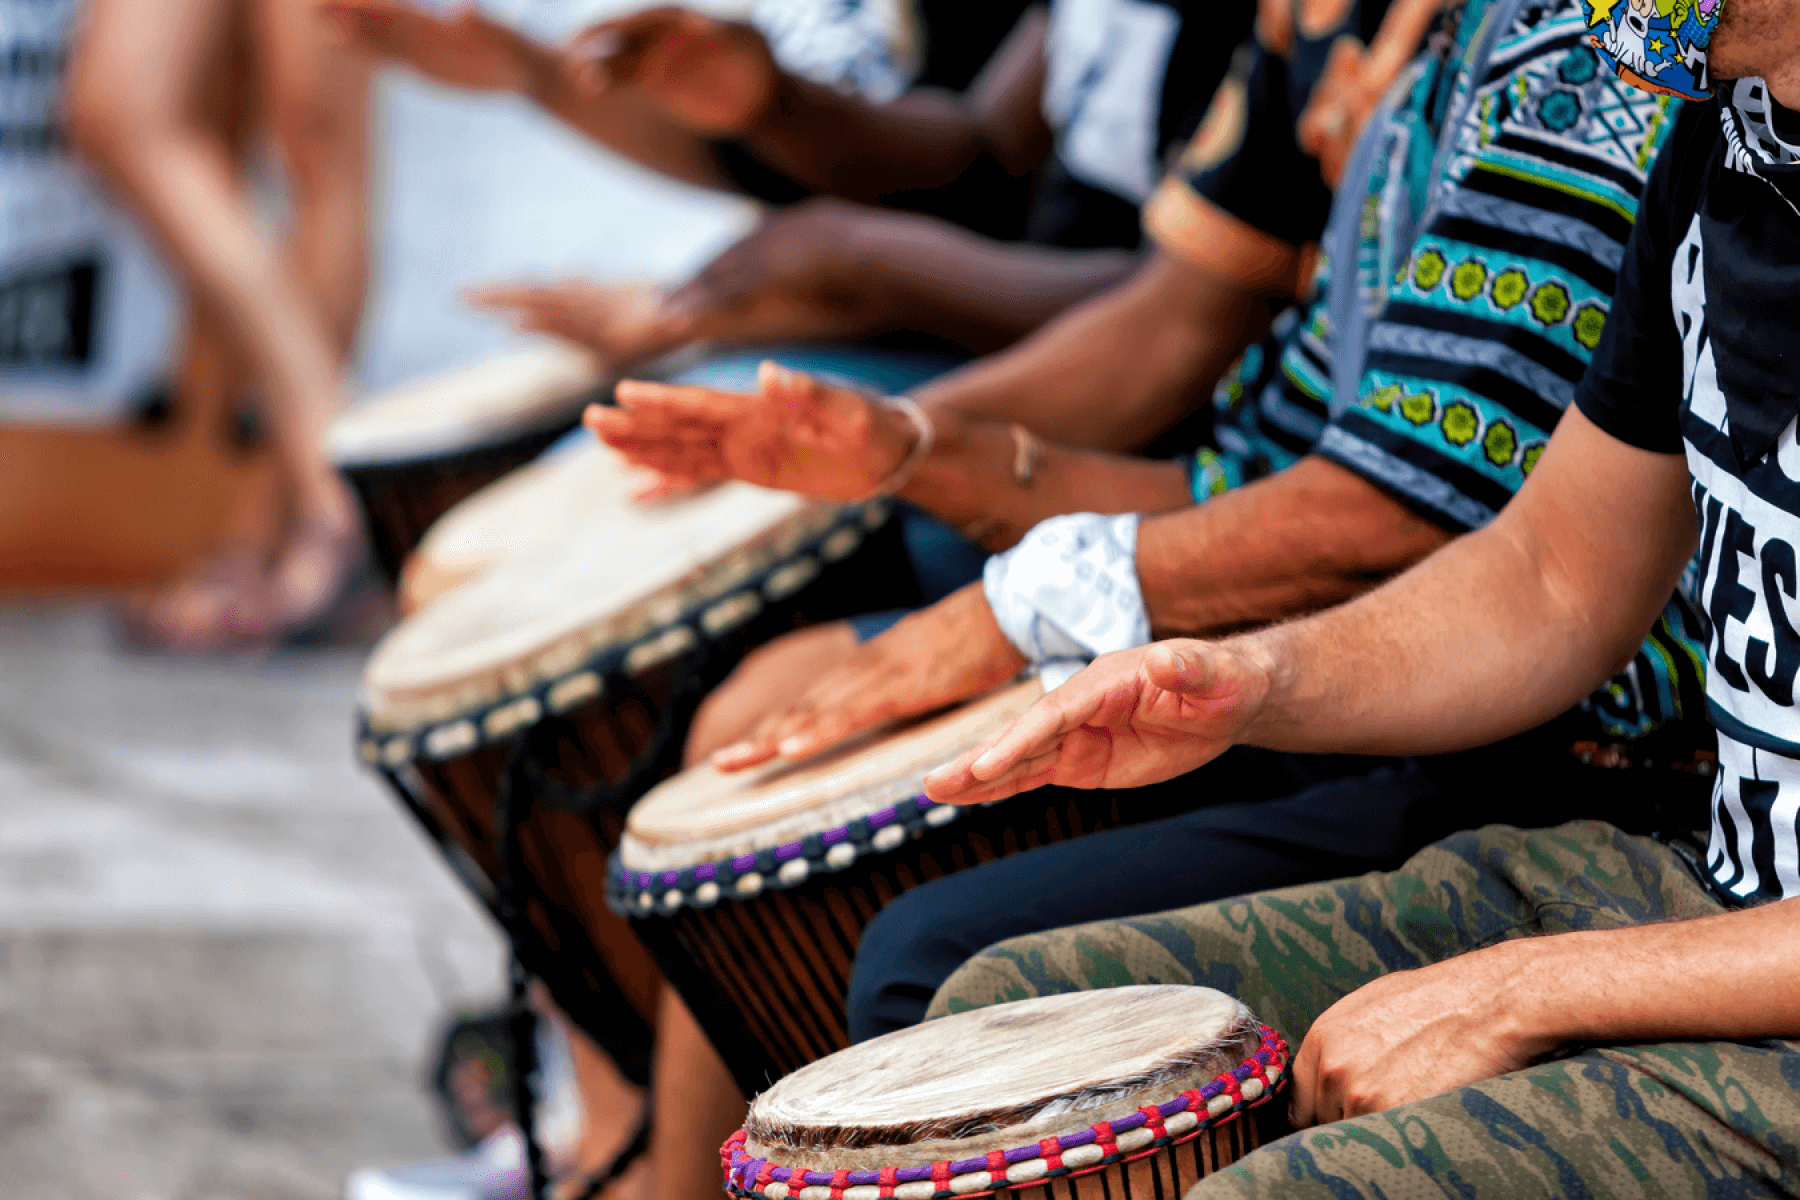 Close up photo of hands drumming on African-style drums.